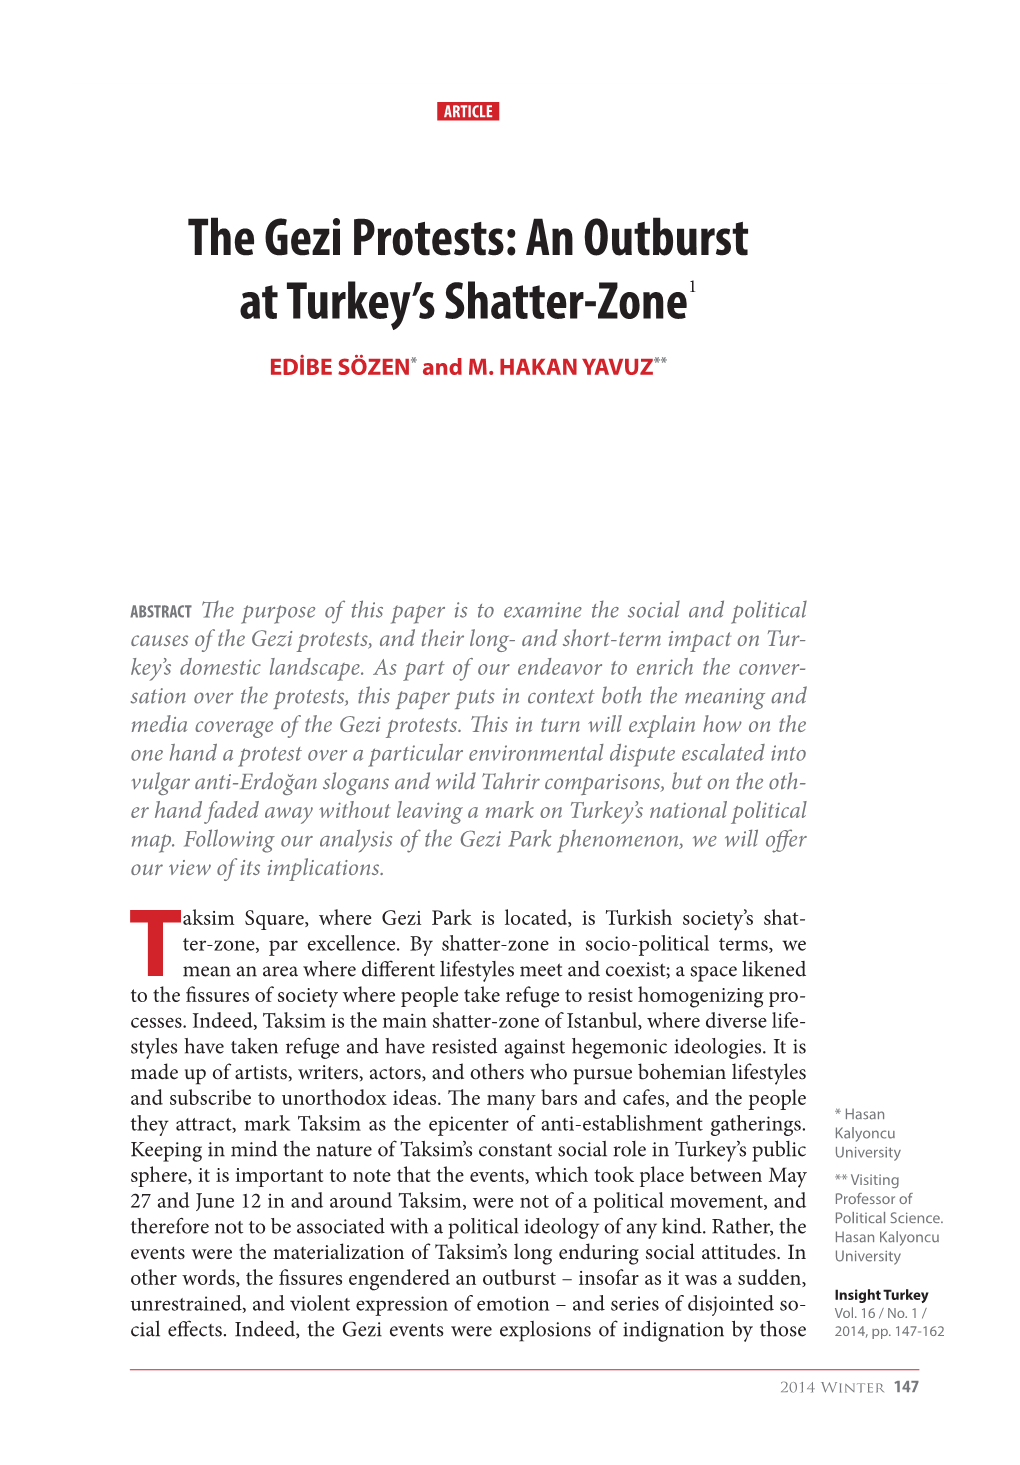 The Gezi Protests: an Outburst at Turkey’S Shatter-Zone